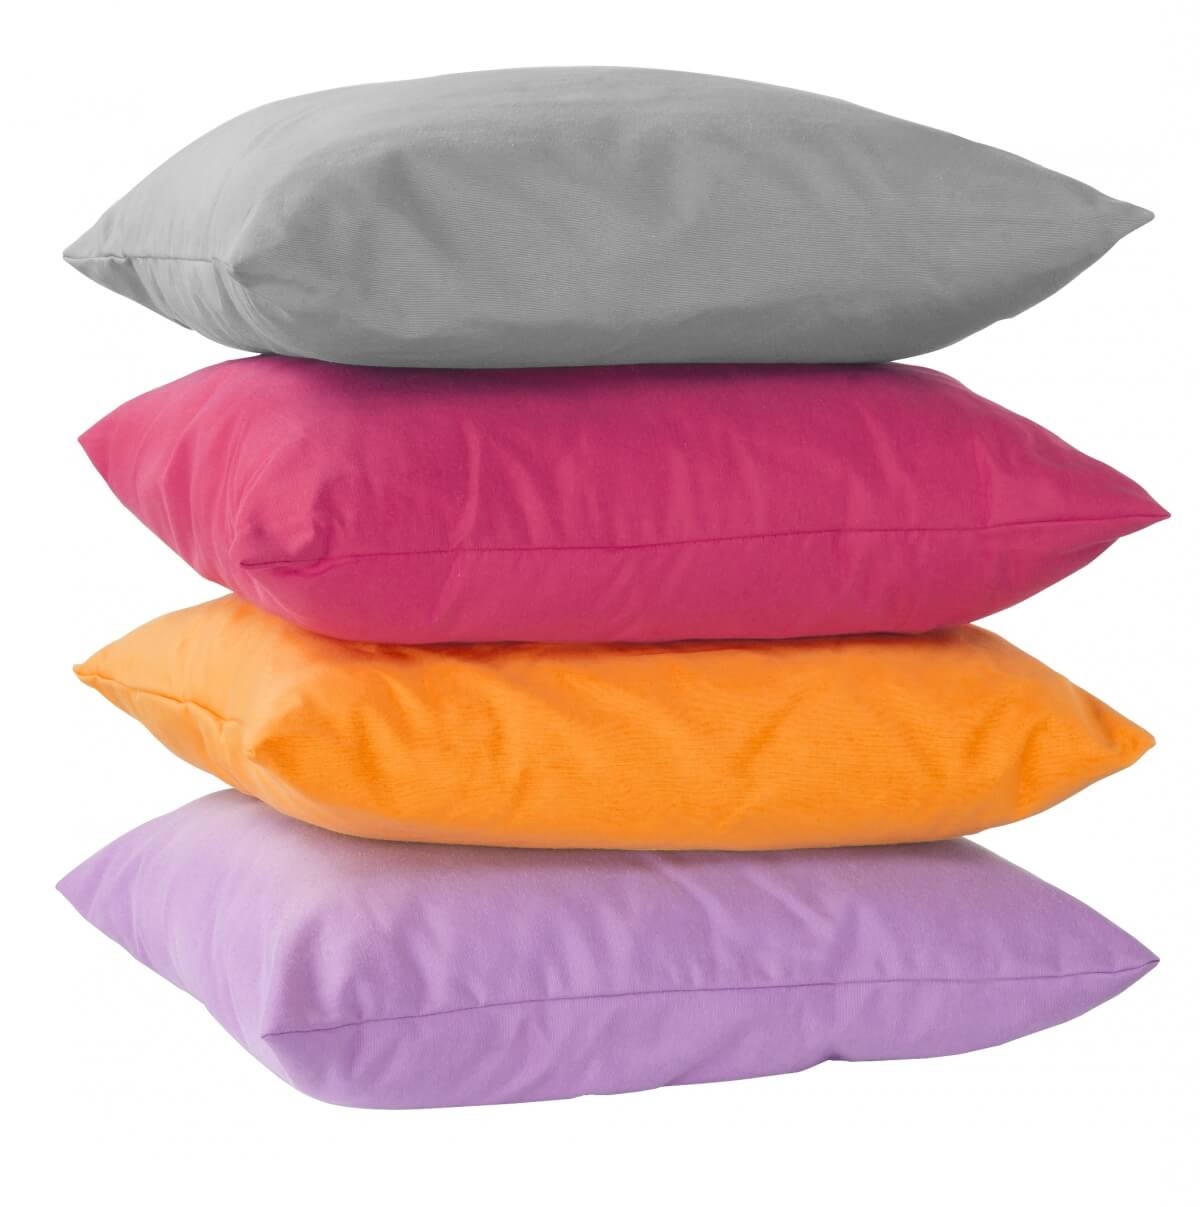 Coussin 45x45 - lilas